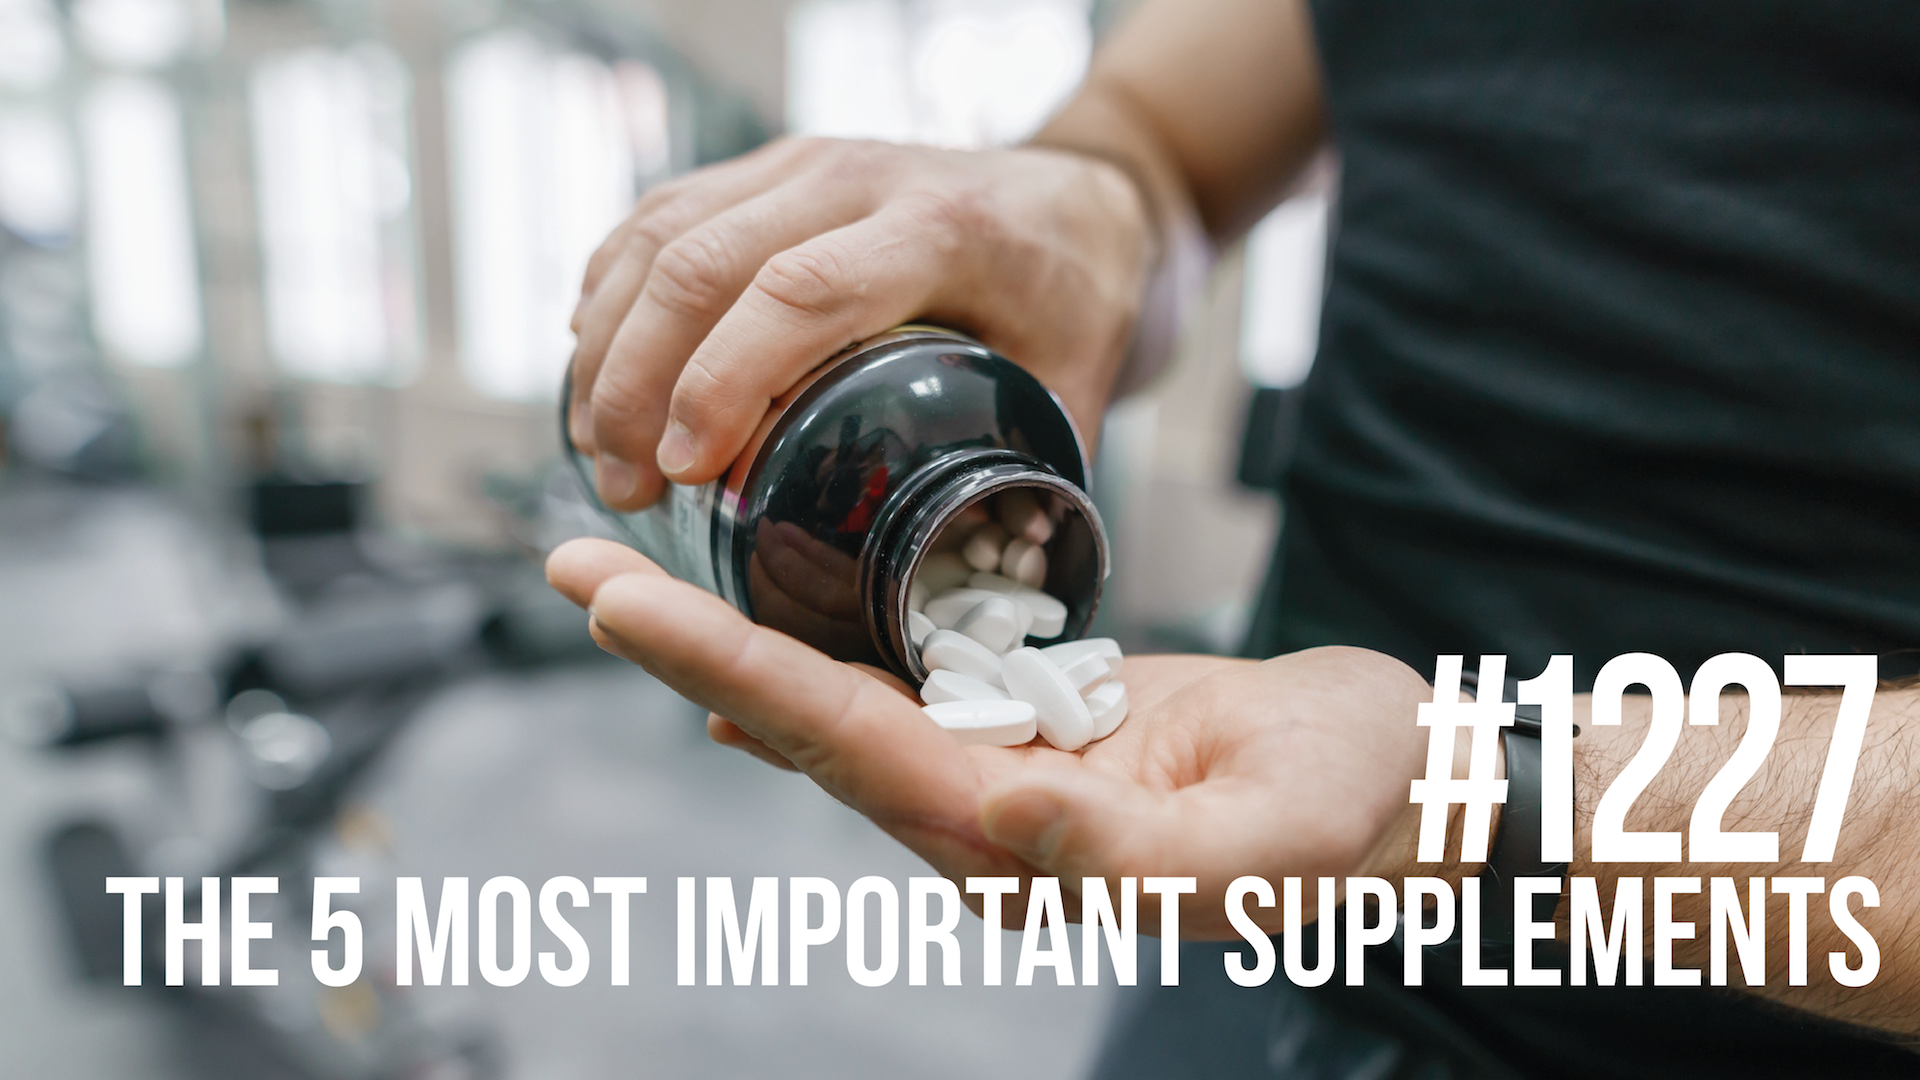 1227: The 5 Most Important Supplements to Take